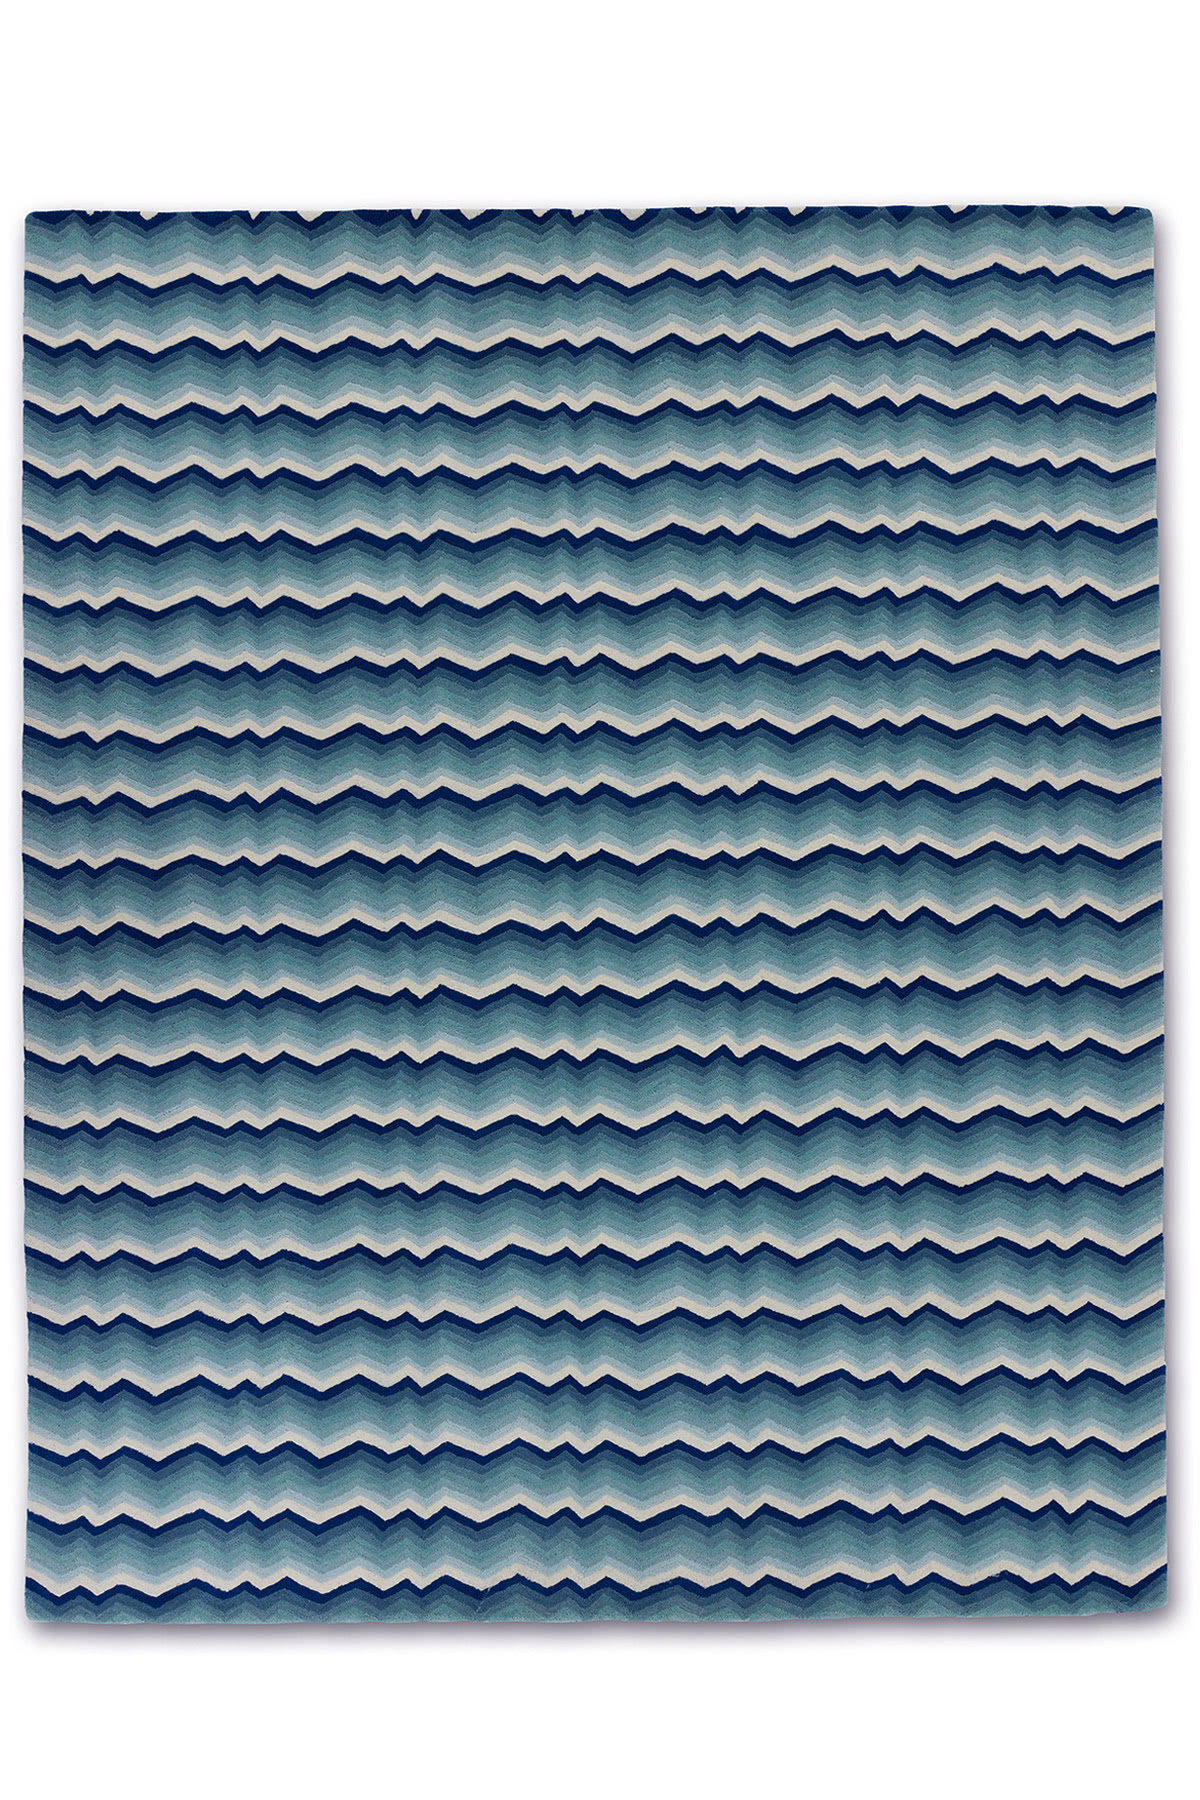 A large, modern area rug in blue tones called Buzz Blue